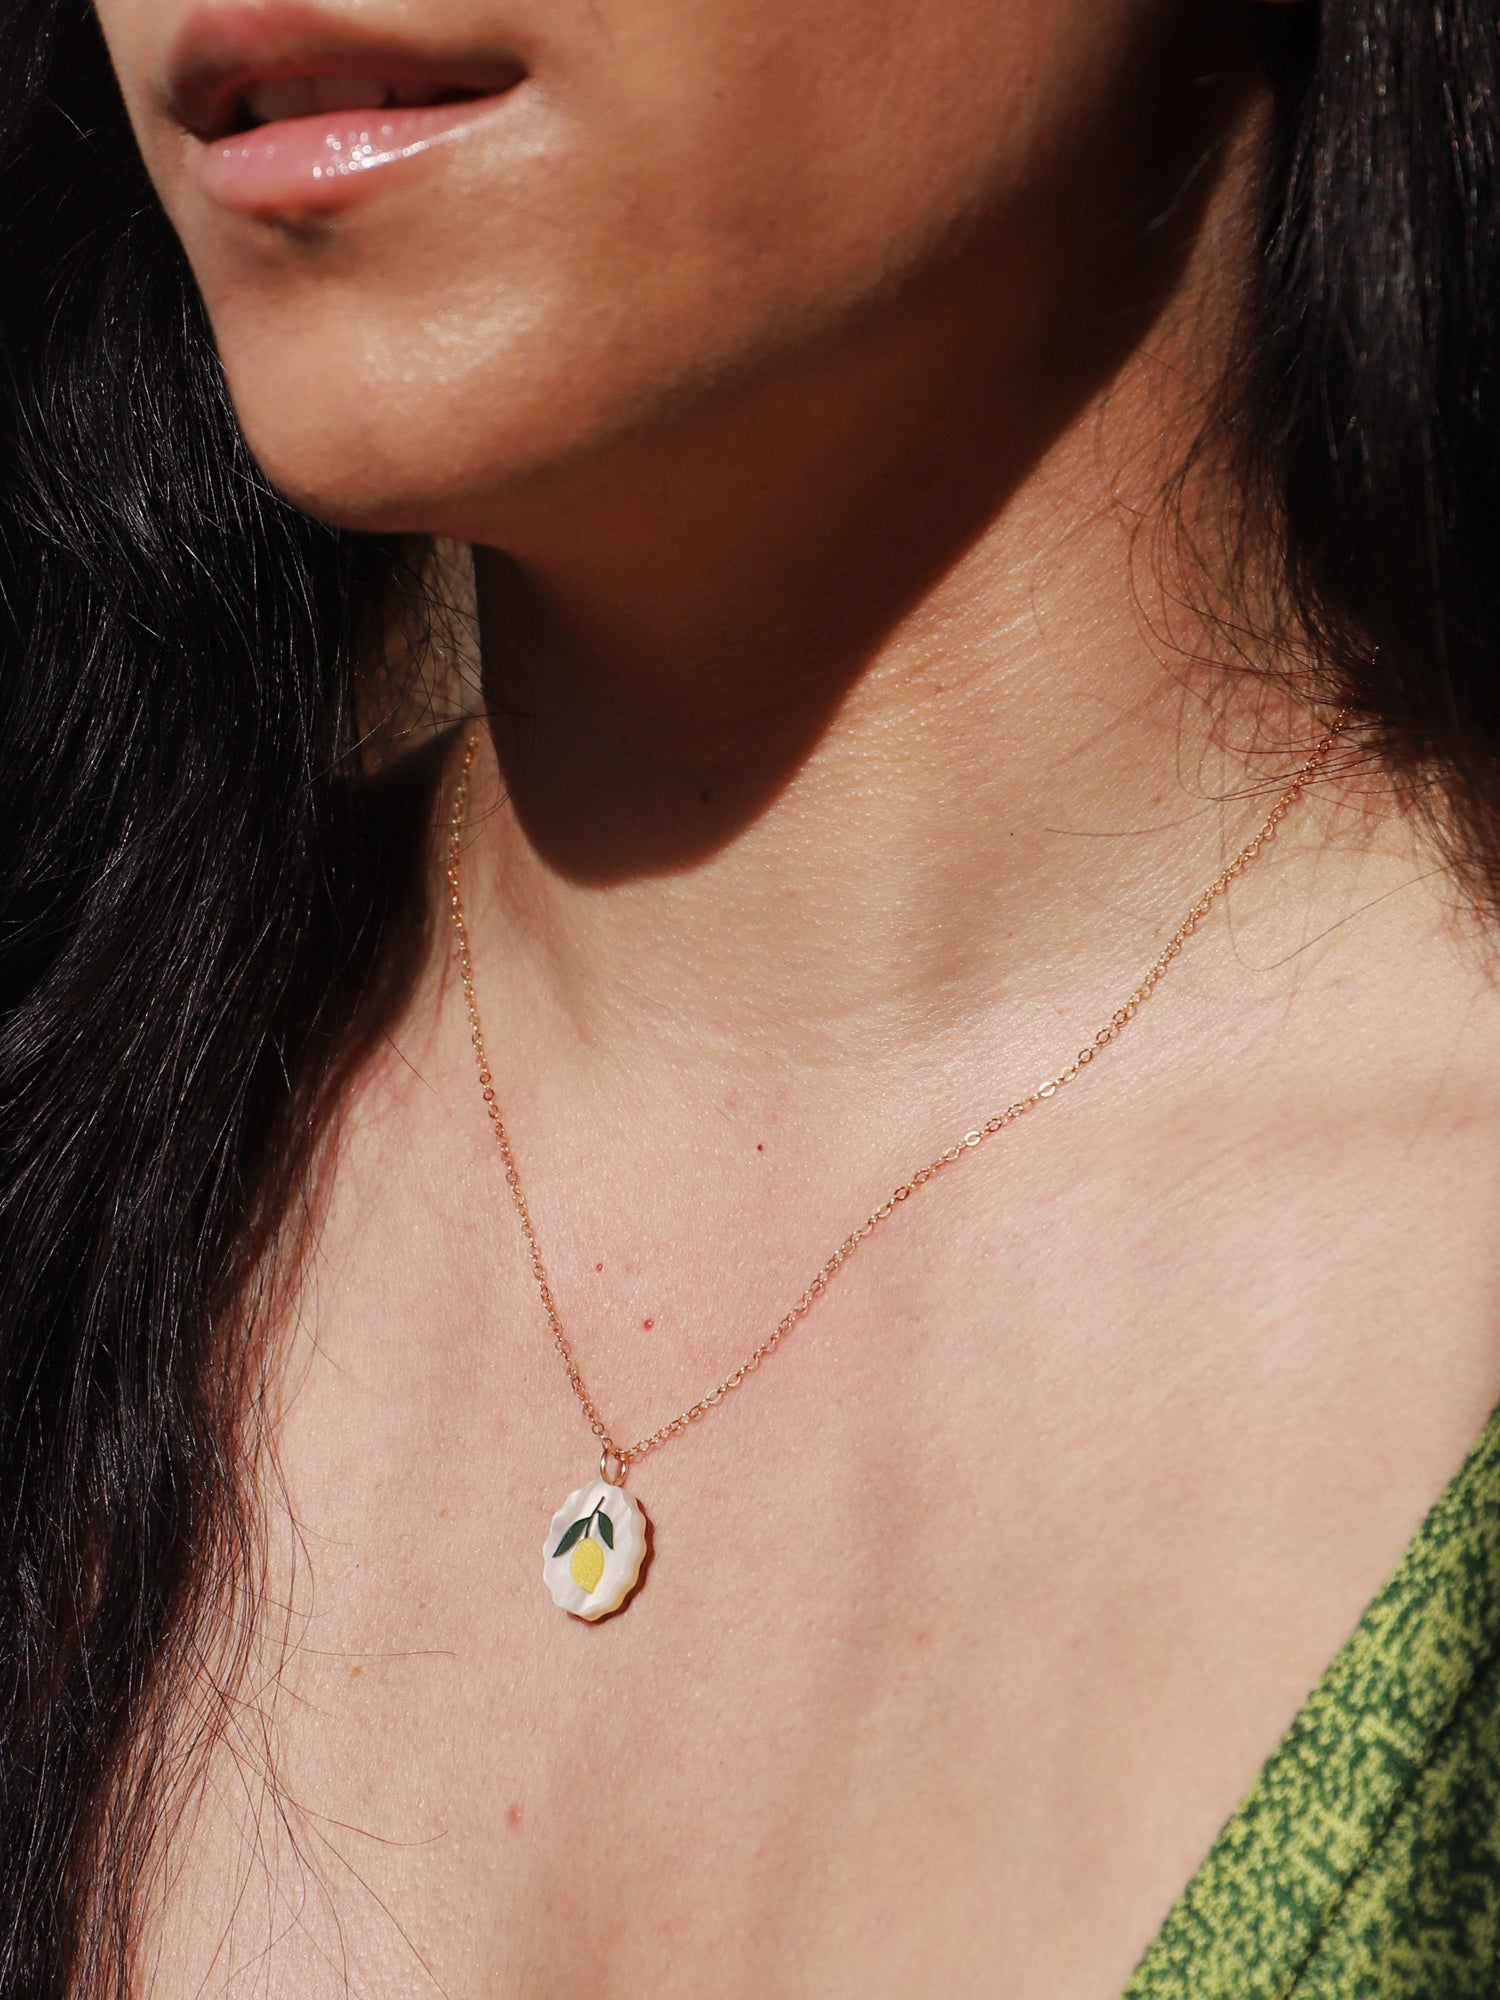 Lemon charm necklace made from acrylic and a 14k gold-filled chain & findings. Handmade in the UK by Wolf & Moon.